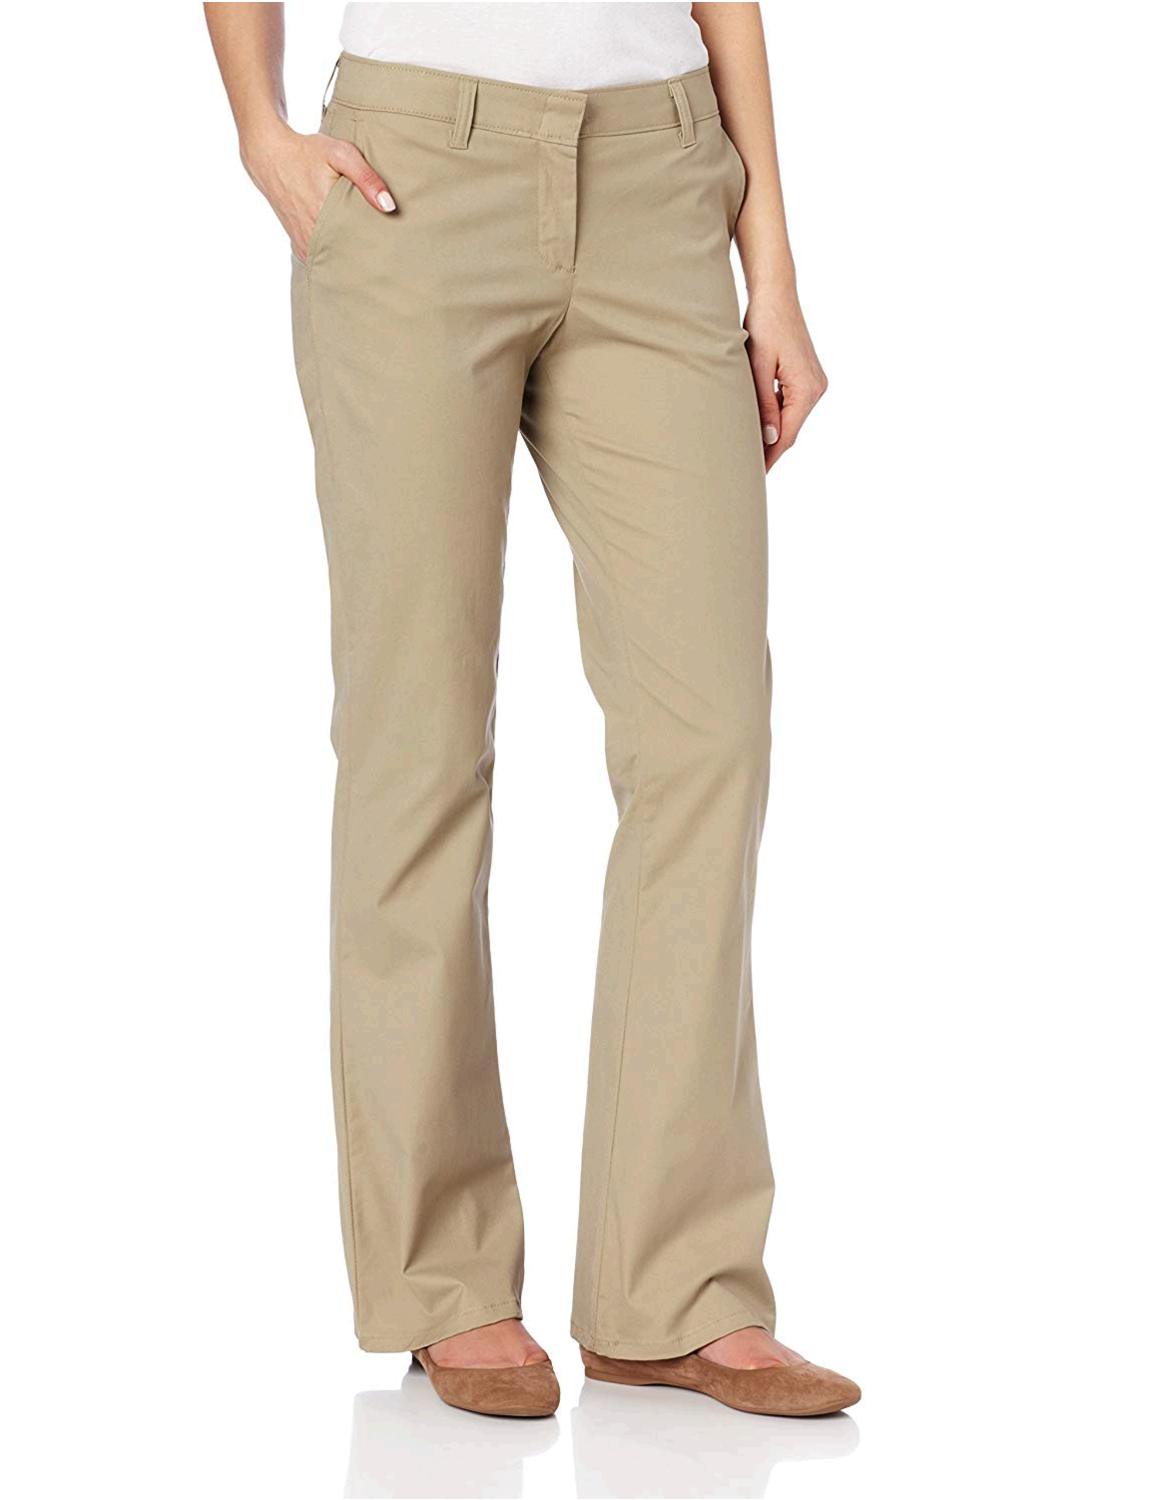 Dickies Women's Flat Front Stretch Twill Pant Slim Fit, Desert Sand, Size  12.0 3 | eBay